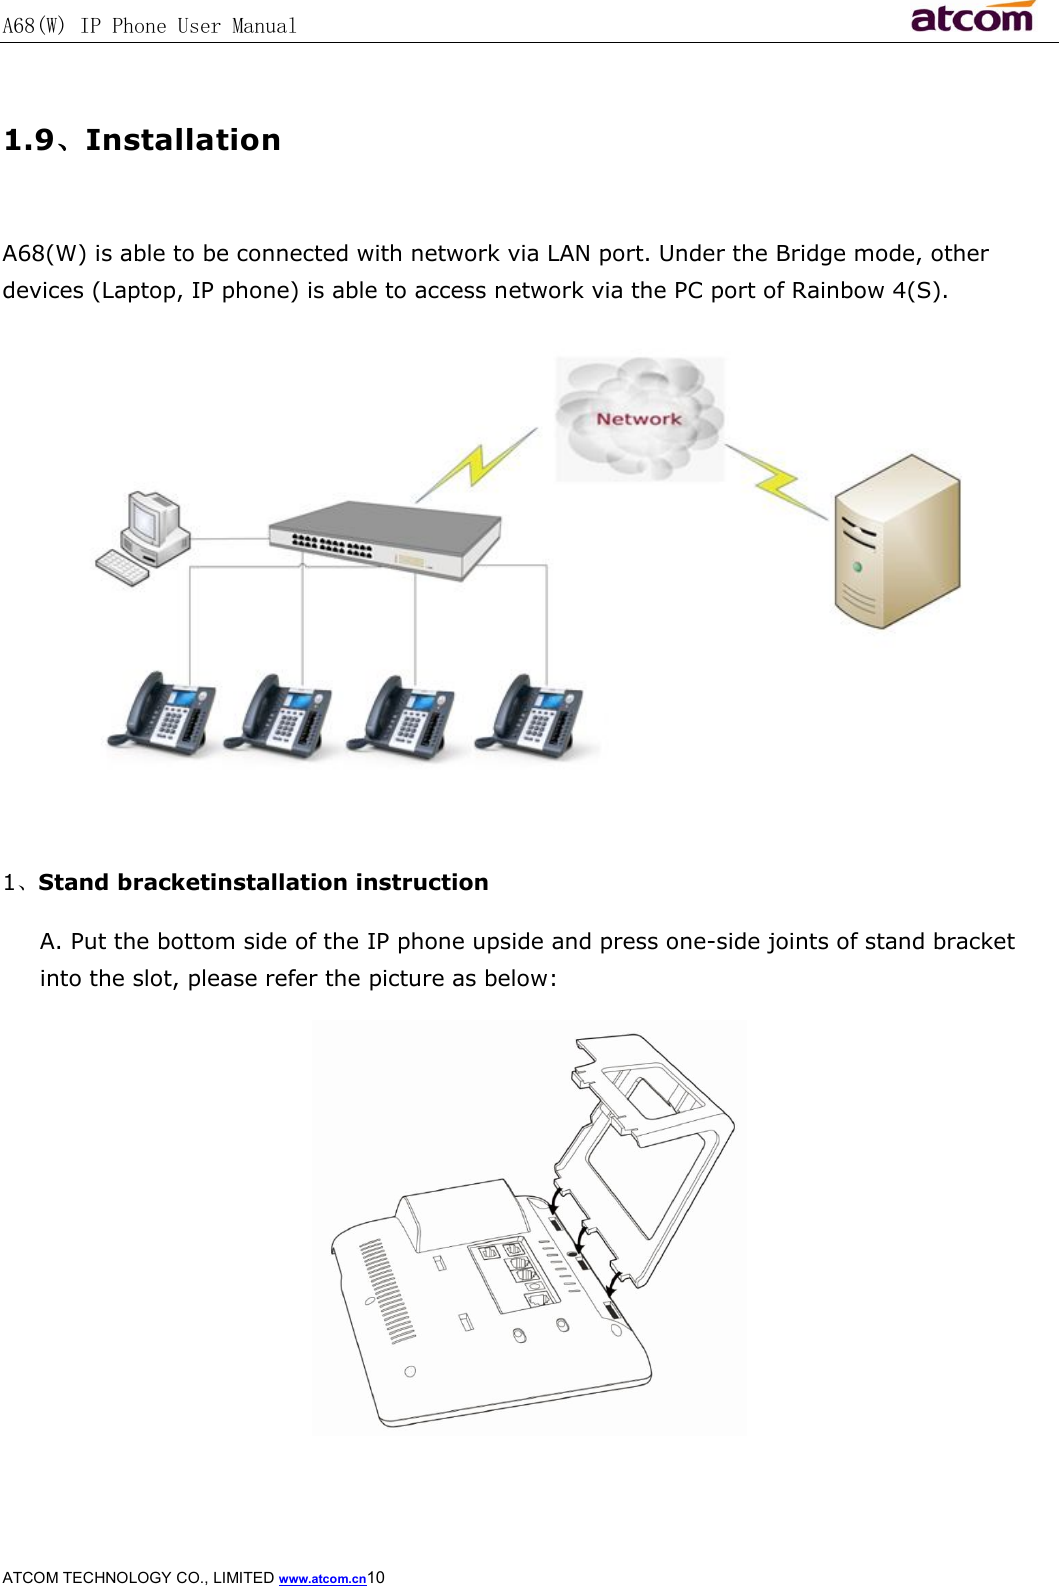 A68(W) IP Phone User Manual                                                           ATCOM TECHNOLOGY CO., LIMITED www.atcom.cn10   1.9、Installation  A68(W) is able to be connected with network via LAN port. Under the Bridge mode, other devices (Laptop, IP phone) is able to access network via the PC port of Rainbow 4(S).   1、Stand bracketinstallation instruction A. Put the bottom side of the IP phone upside and press one-side joints of stand bracket into the slot, please refer the picture as below:  